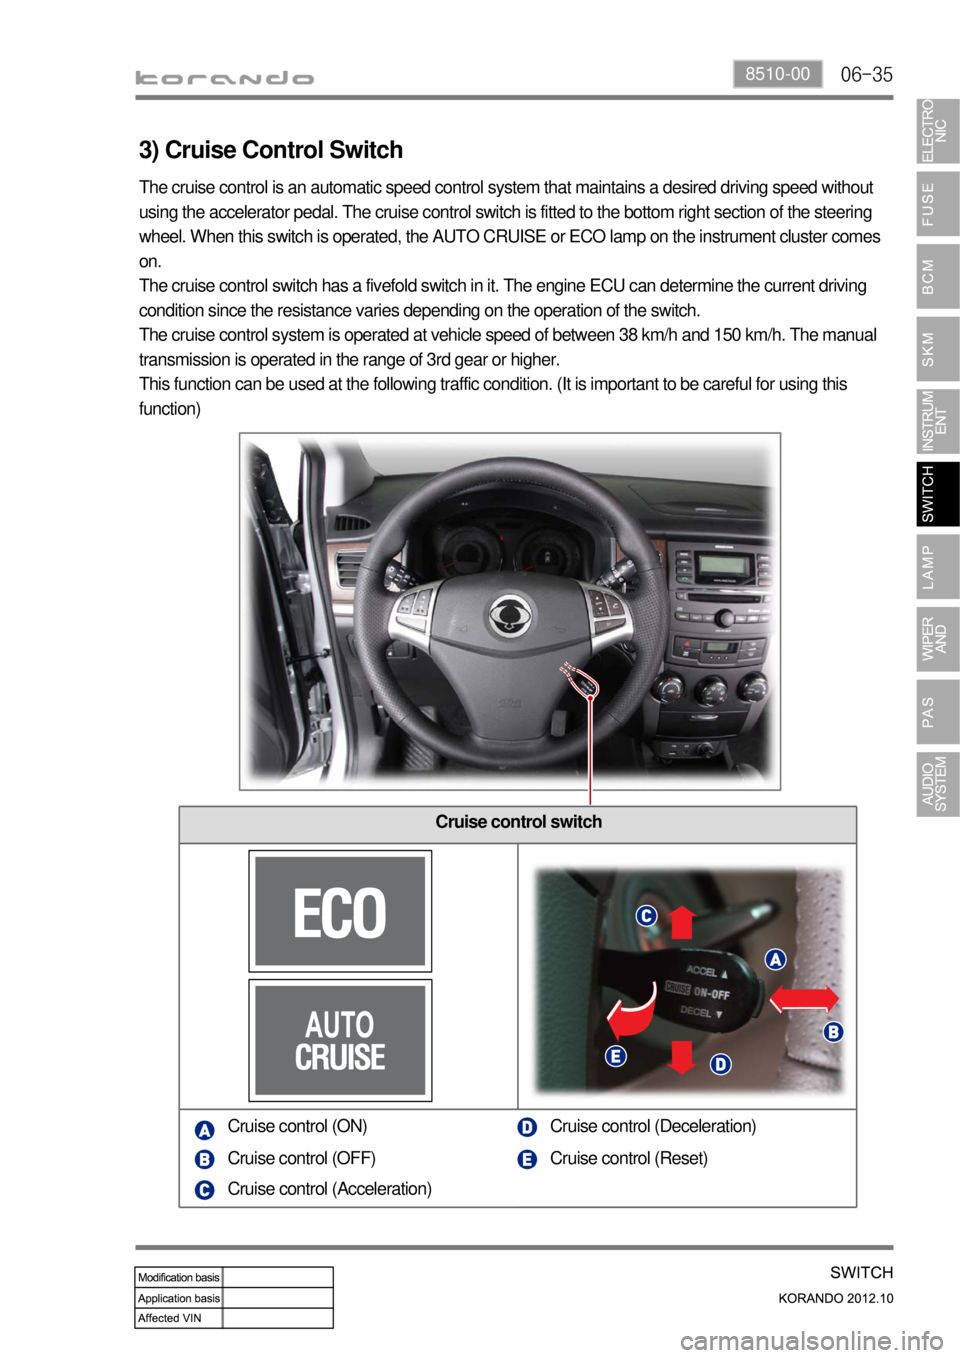 SSANGYONG KORANDO 2012  Service Manual 06-358510-00
3) Cruise Control Switch
Cruise control switch
The cruise control is an automatic speed control system that maintains a desired driving speed without 
using the accelerator pedal. The cru